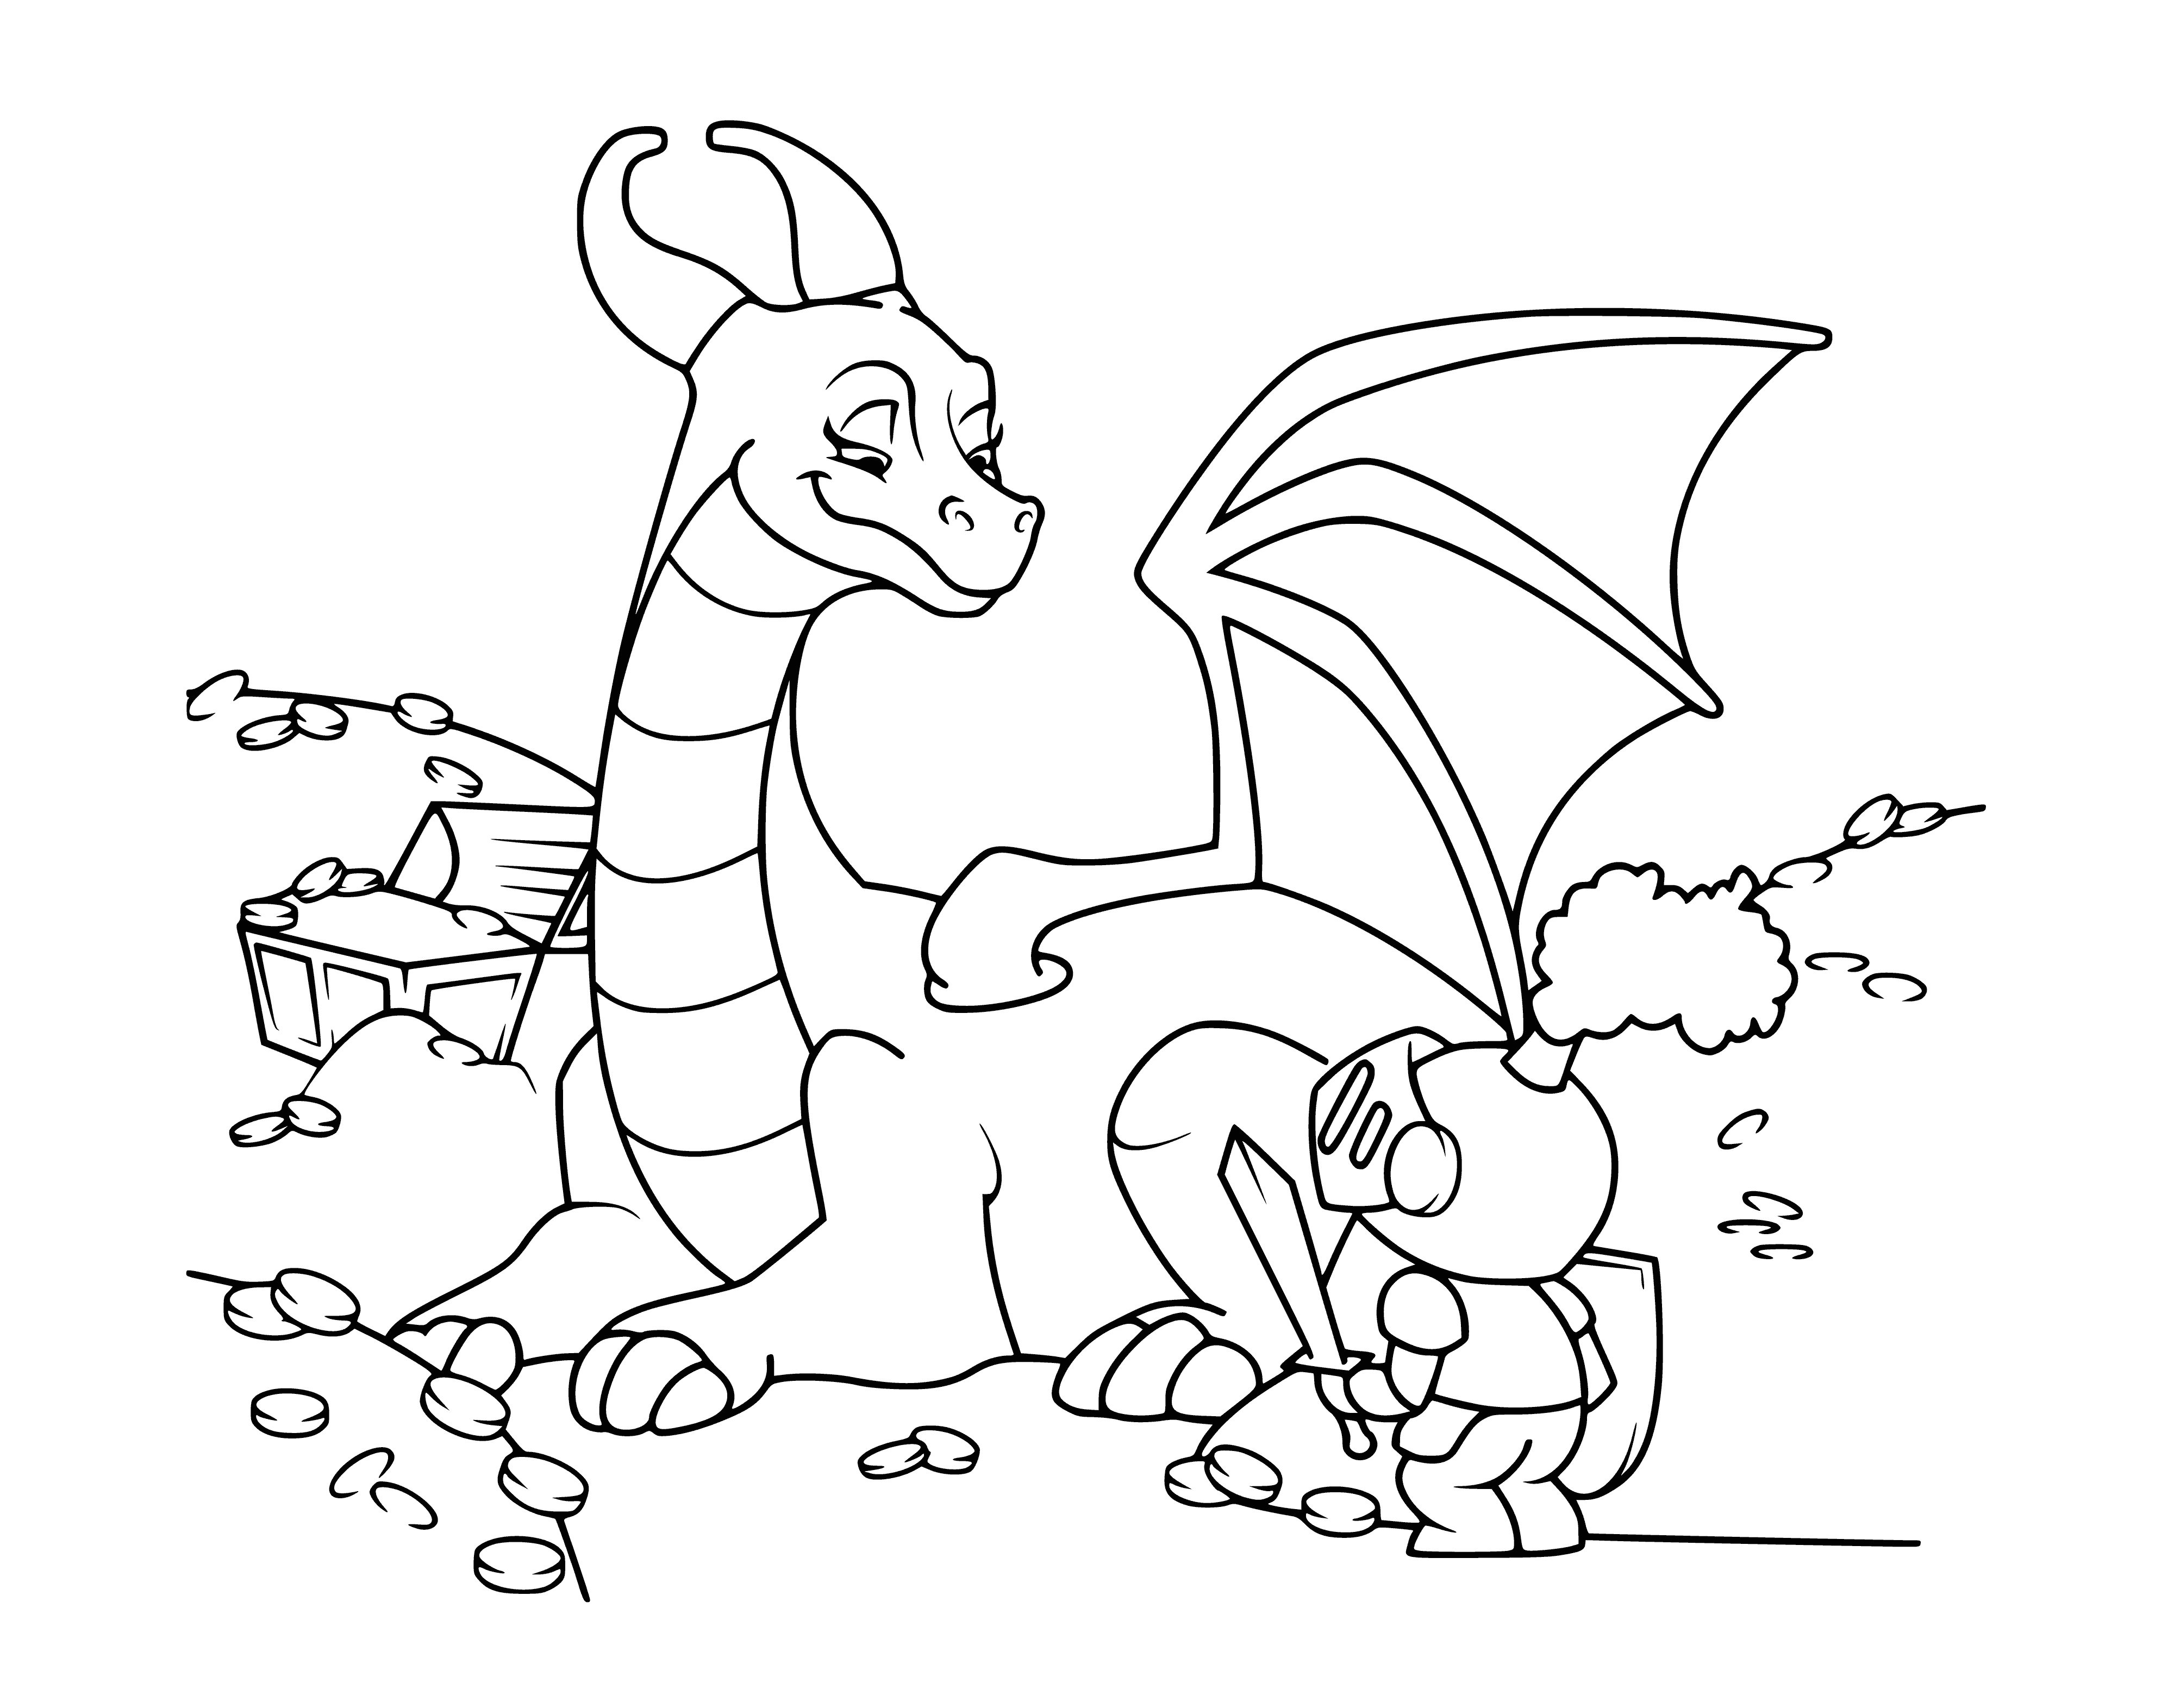 Dragon and knight coloring page